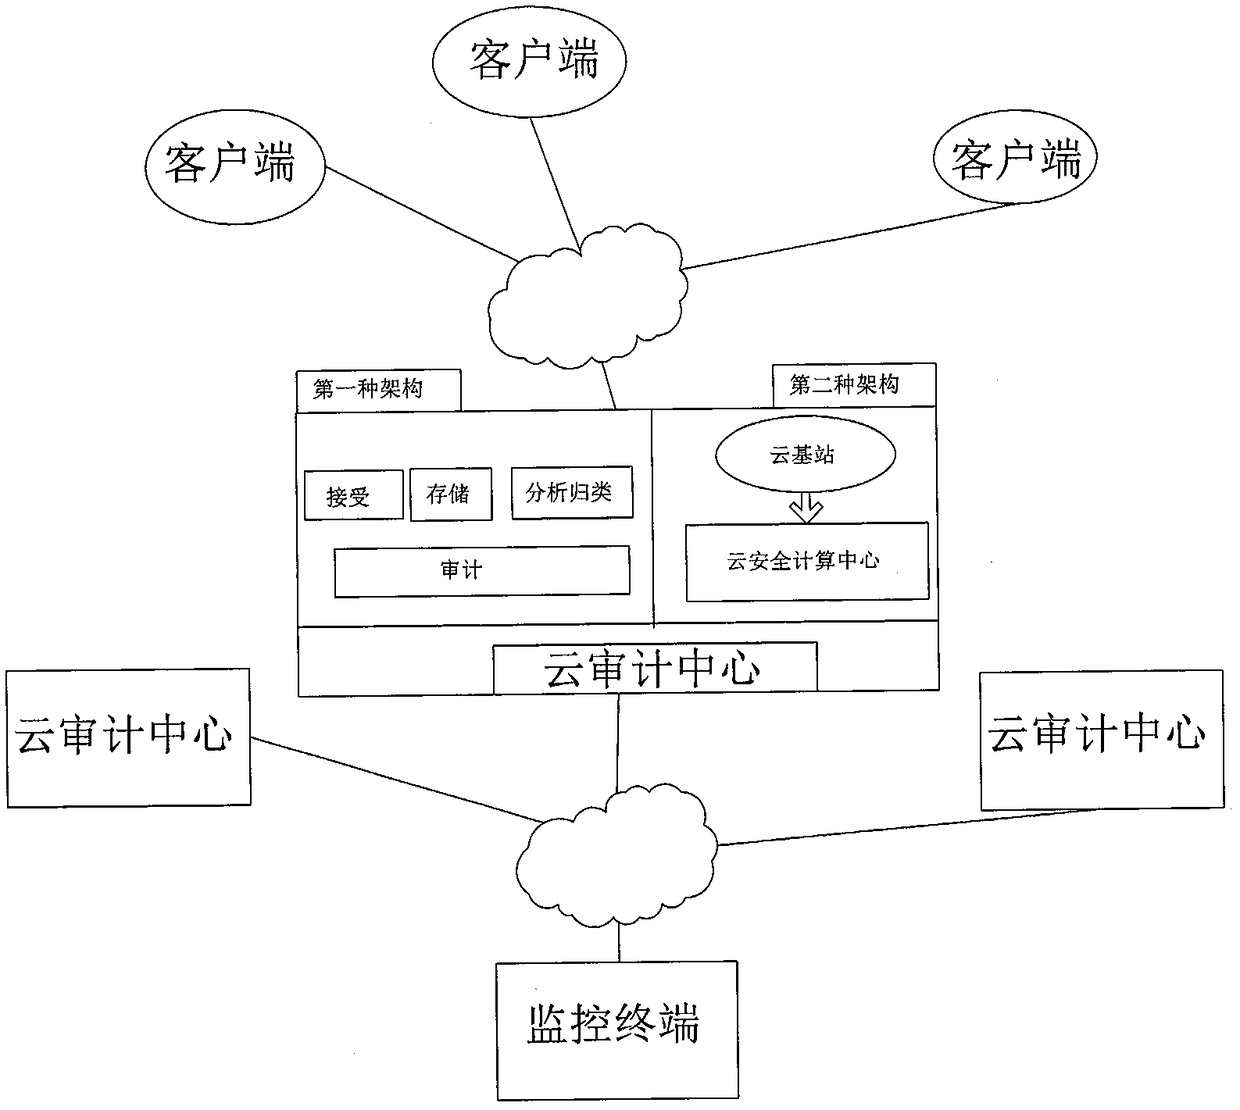 Security audit system and method based on cloud computing